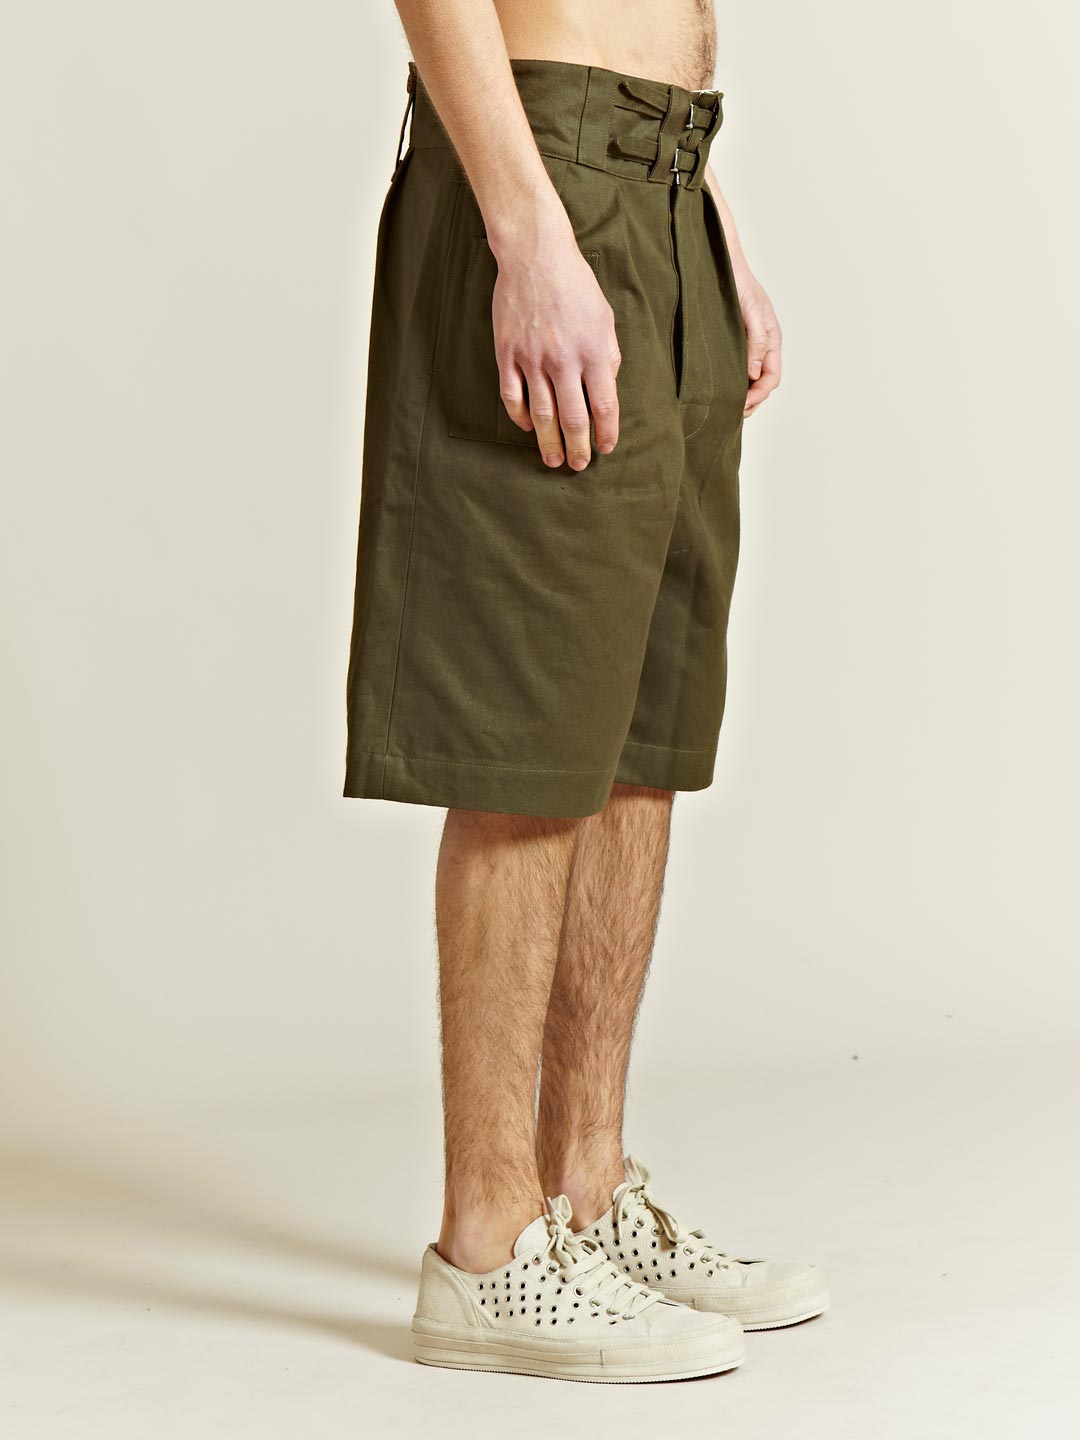 Nigel Cabourn Mens Bombay Bloomer Drill Shorts in Green for Men - Lyst